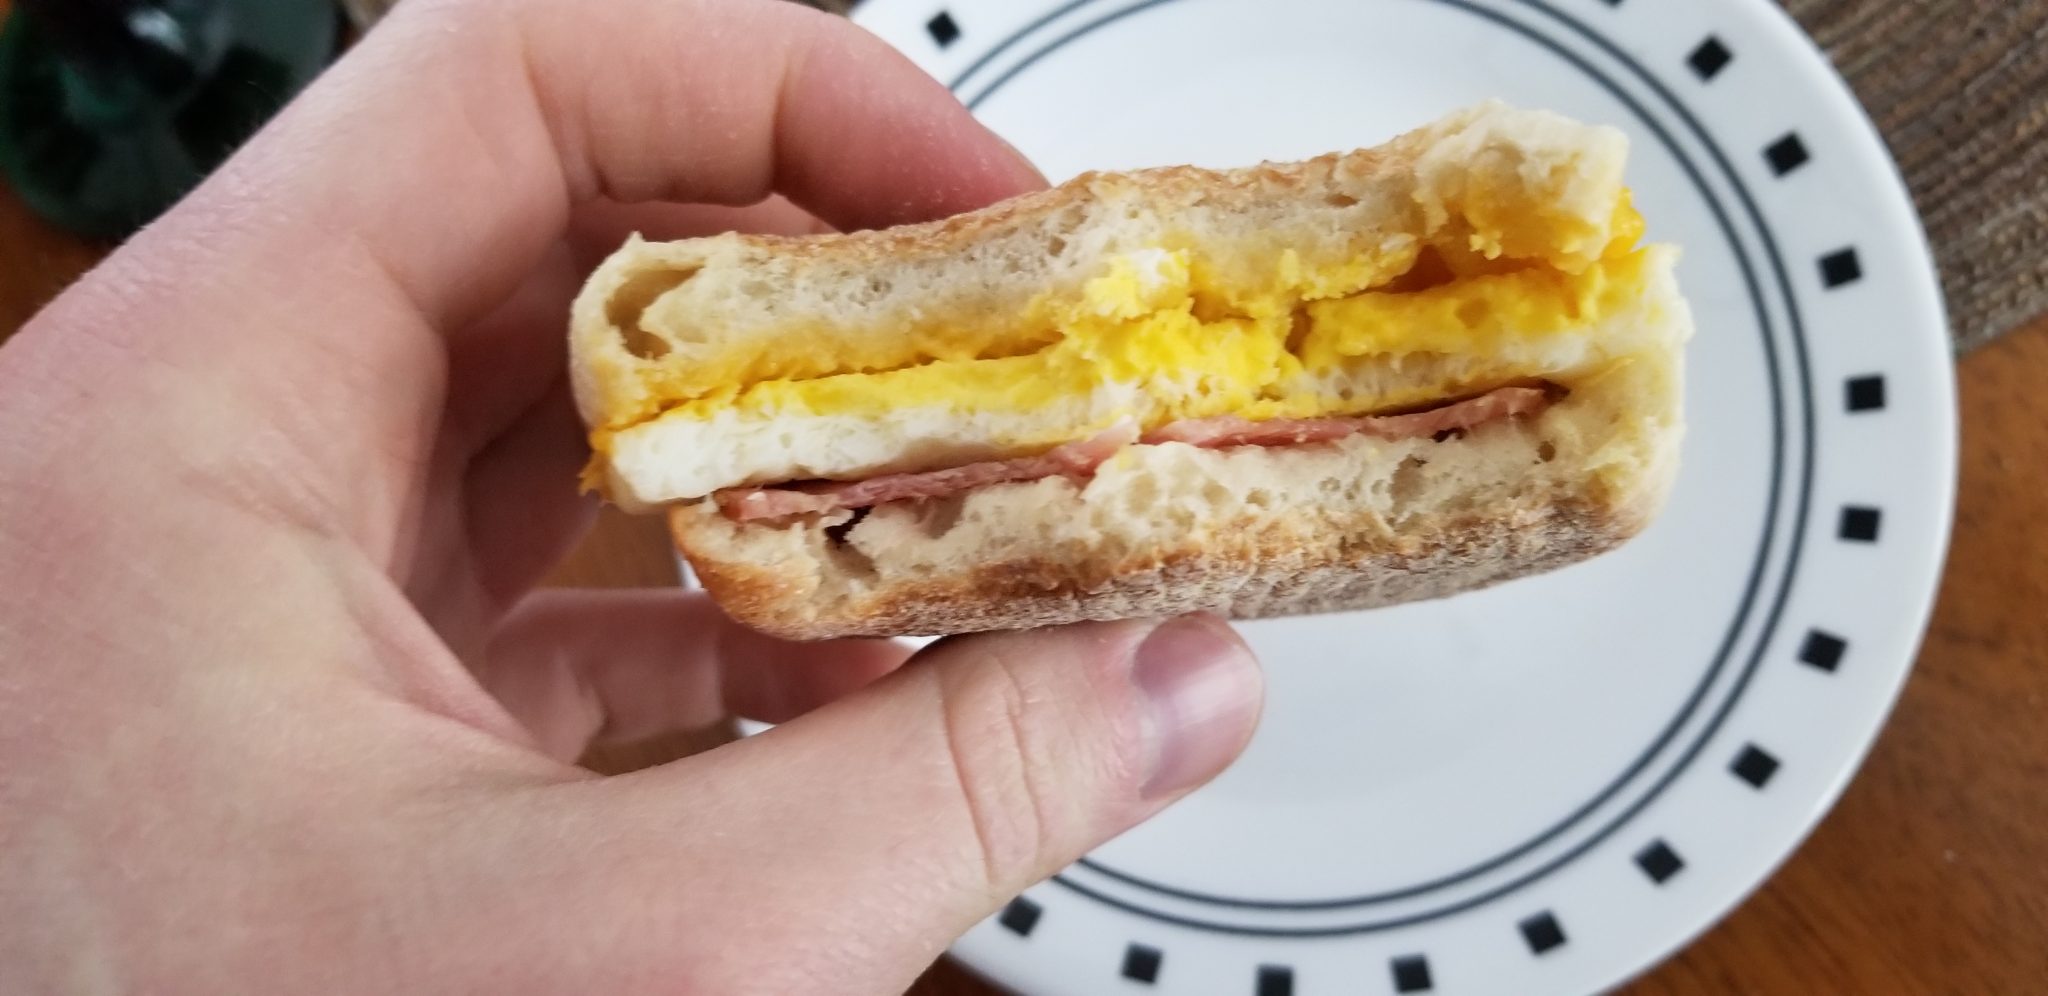 Jimmy Dean English Muffin, Canadian Bacon, Whole Egg and Cheese with two bites from the front